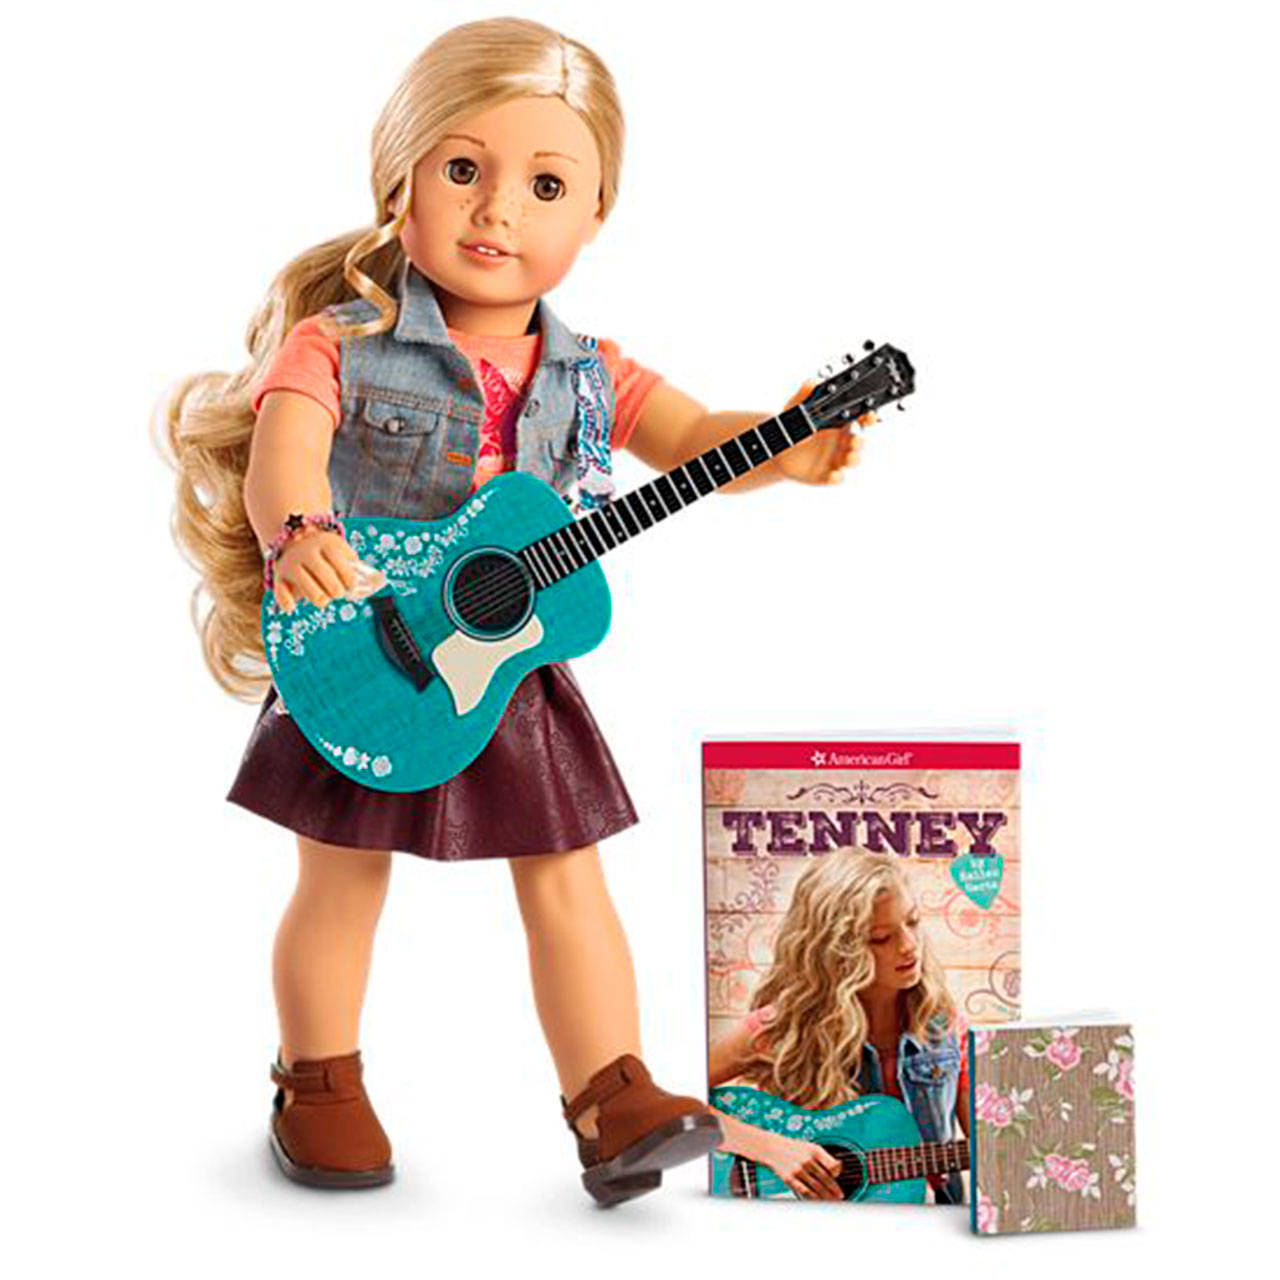 The grand prize at the Promise of Spring Doll Show will be American Girl doll Tenney and accessories.